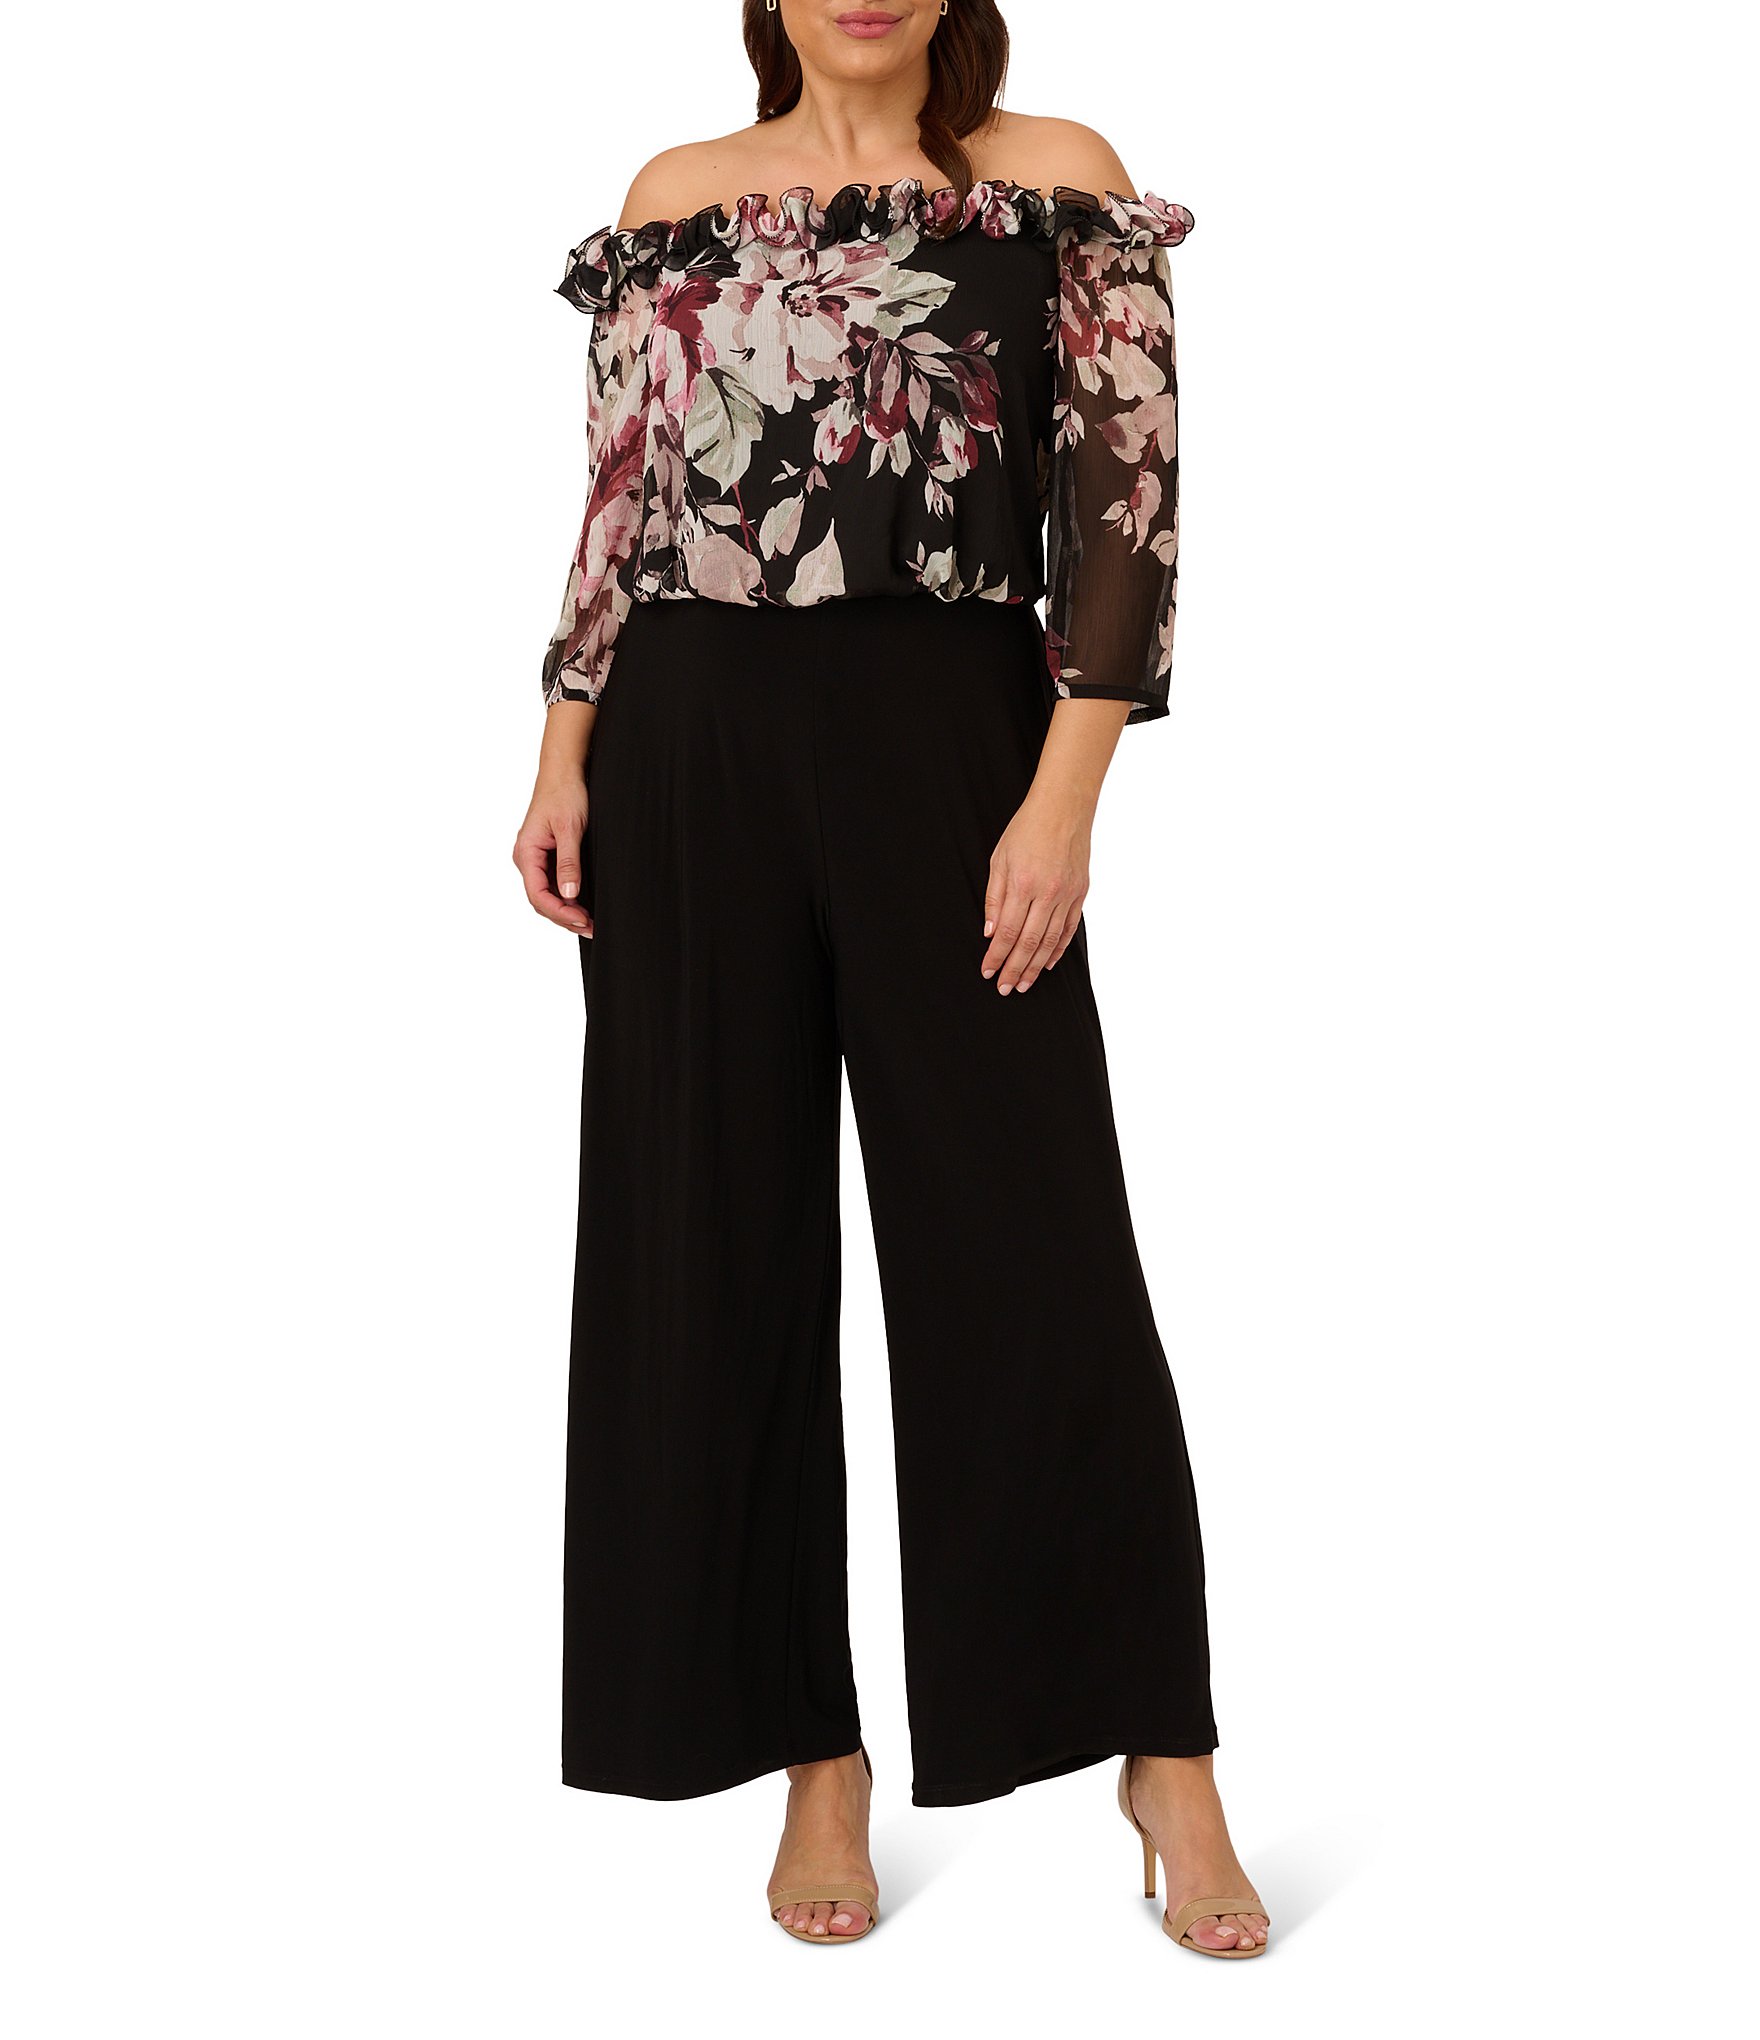 Adrianna Papell Plus Size Floral Print 3/4 Sleeve Off-the-Shoulder Neck ...